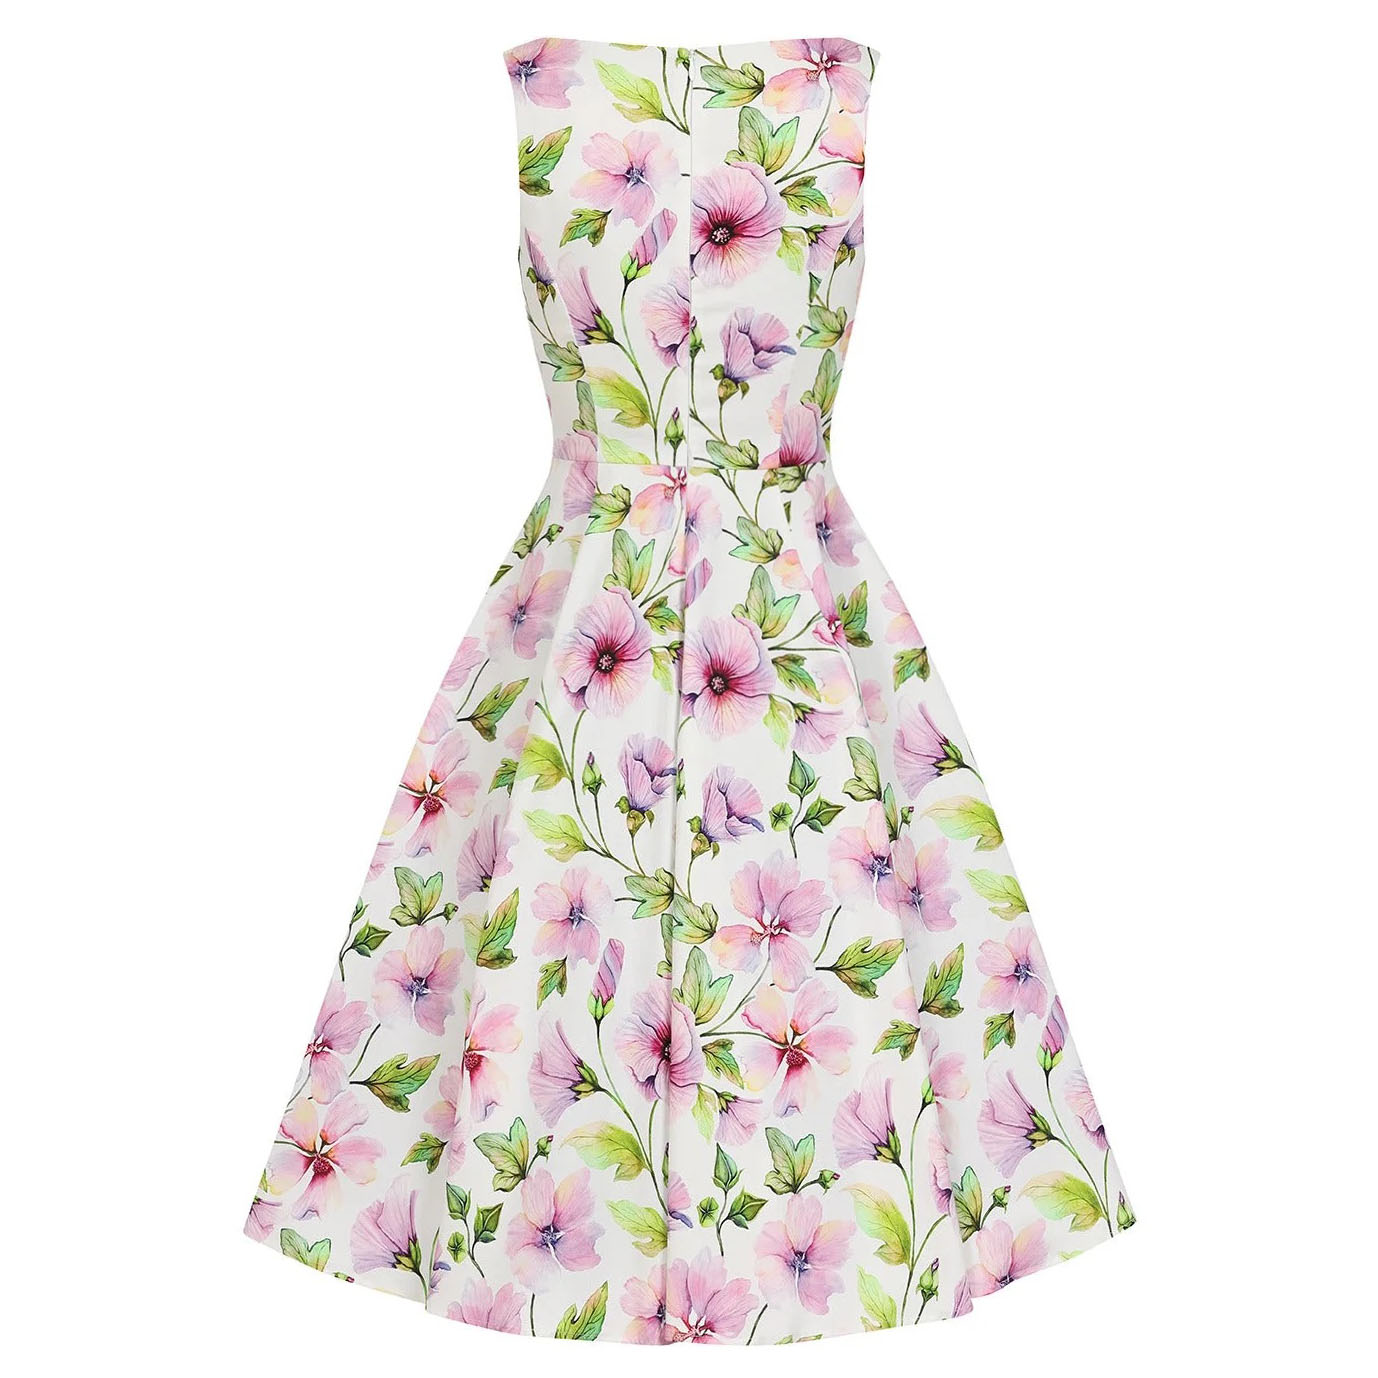 White & Spring Floral Print Audrey Style 50s Swing Dress